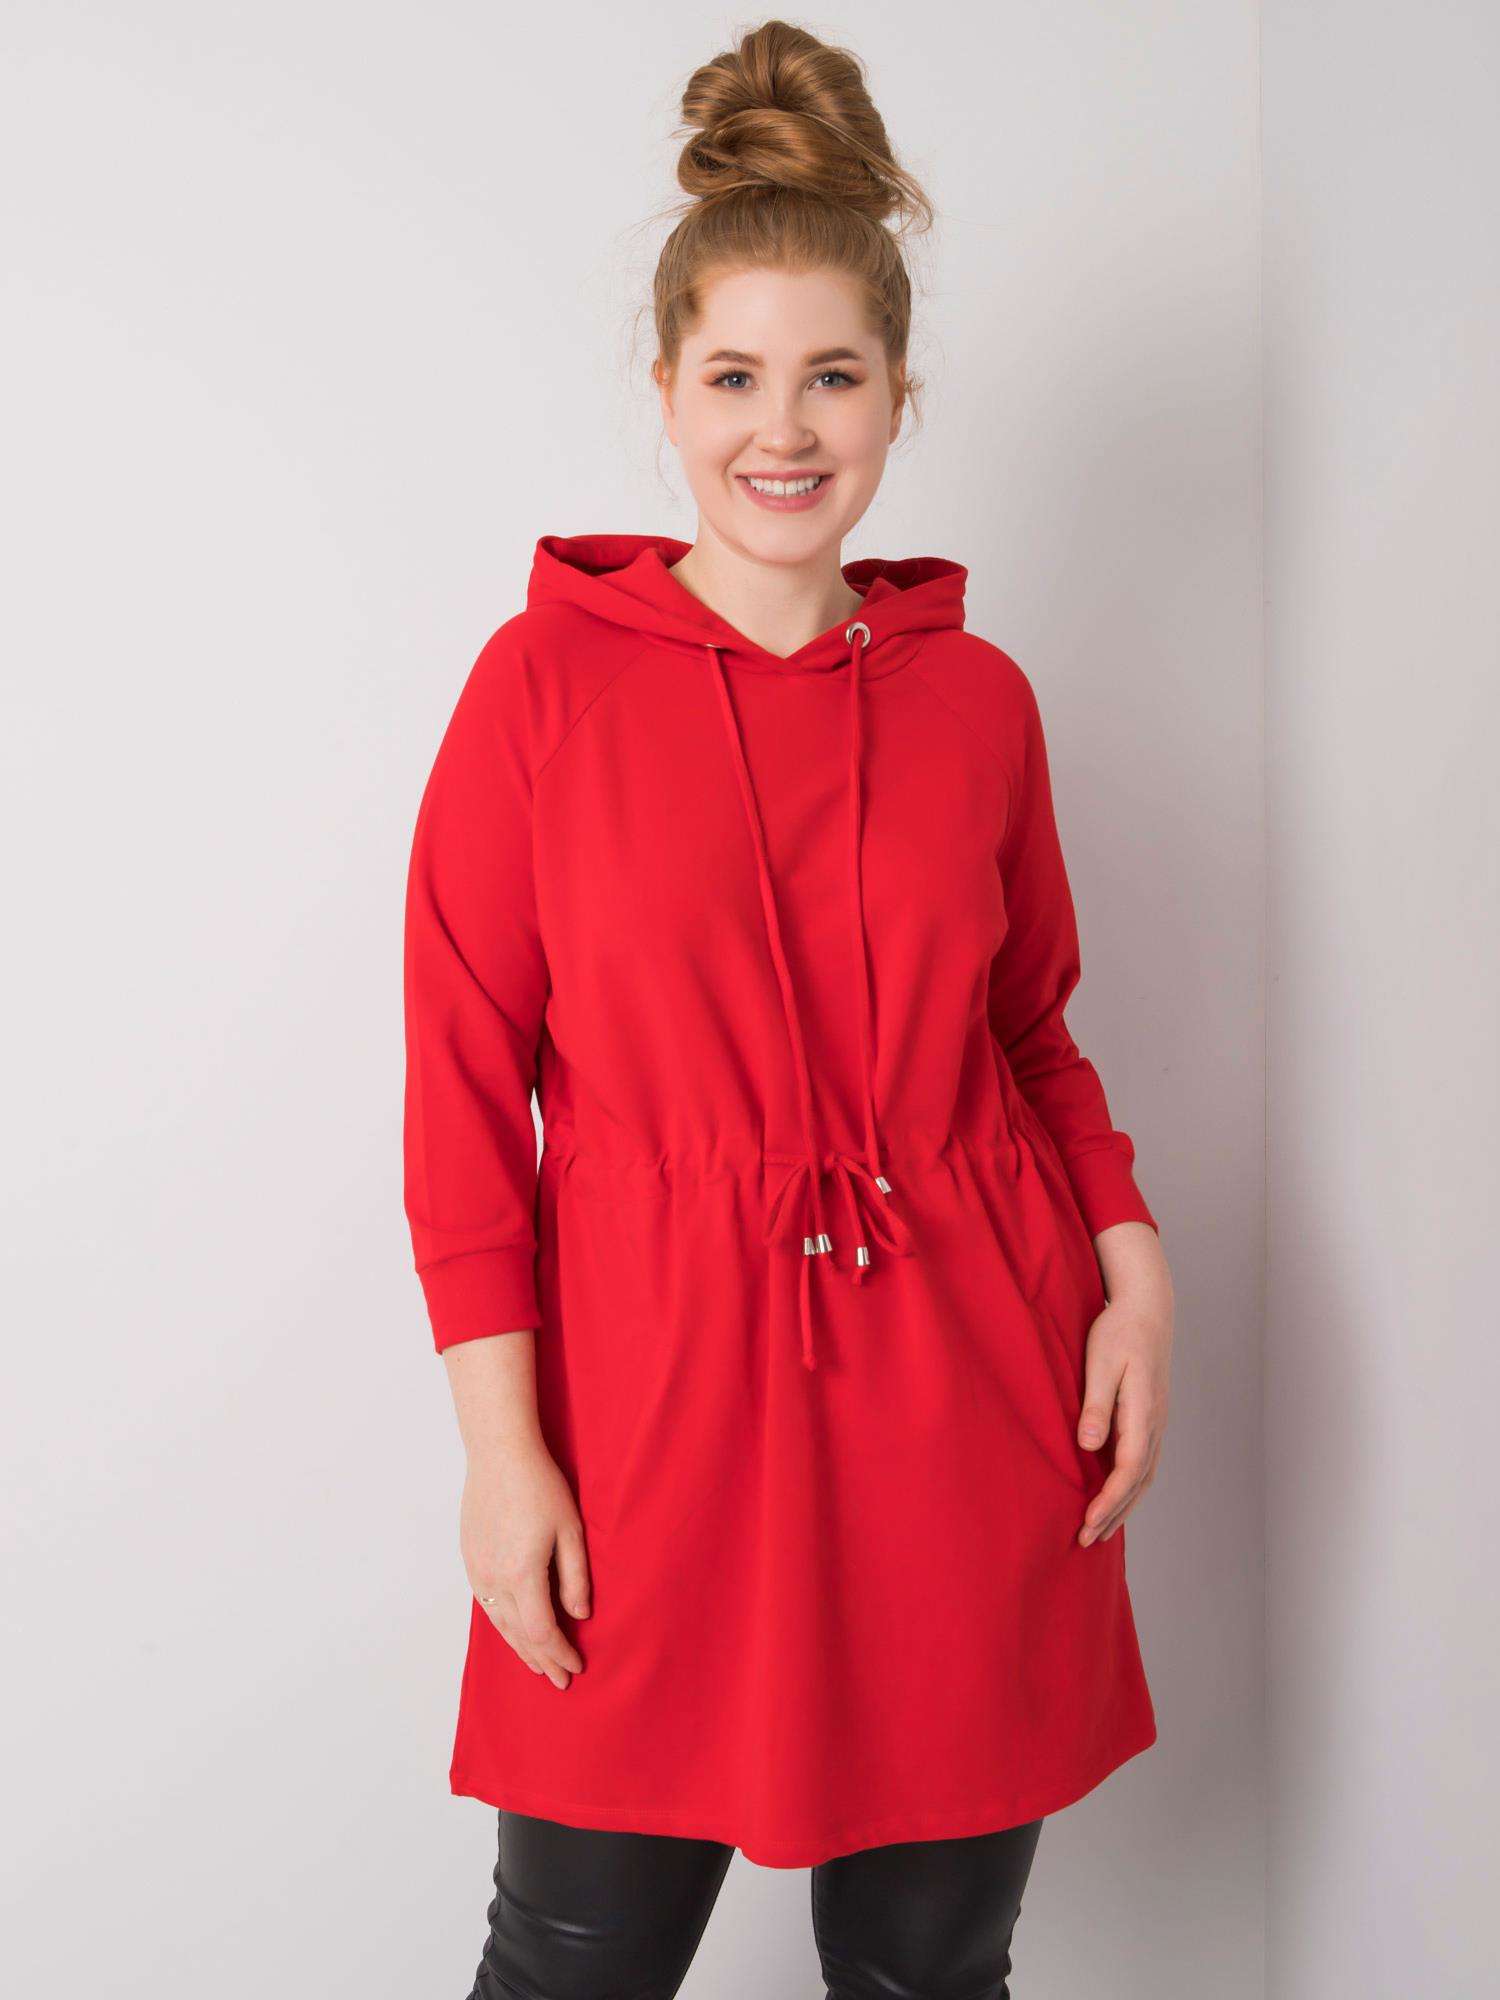 Long Red Hoodie Of Larger Size